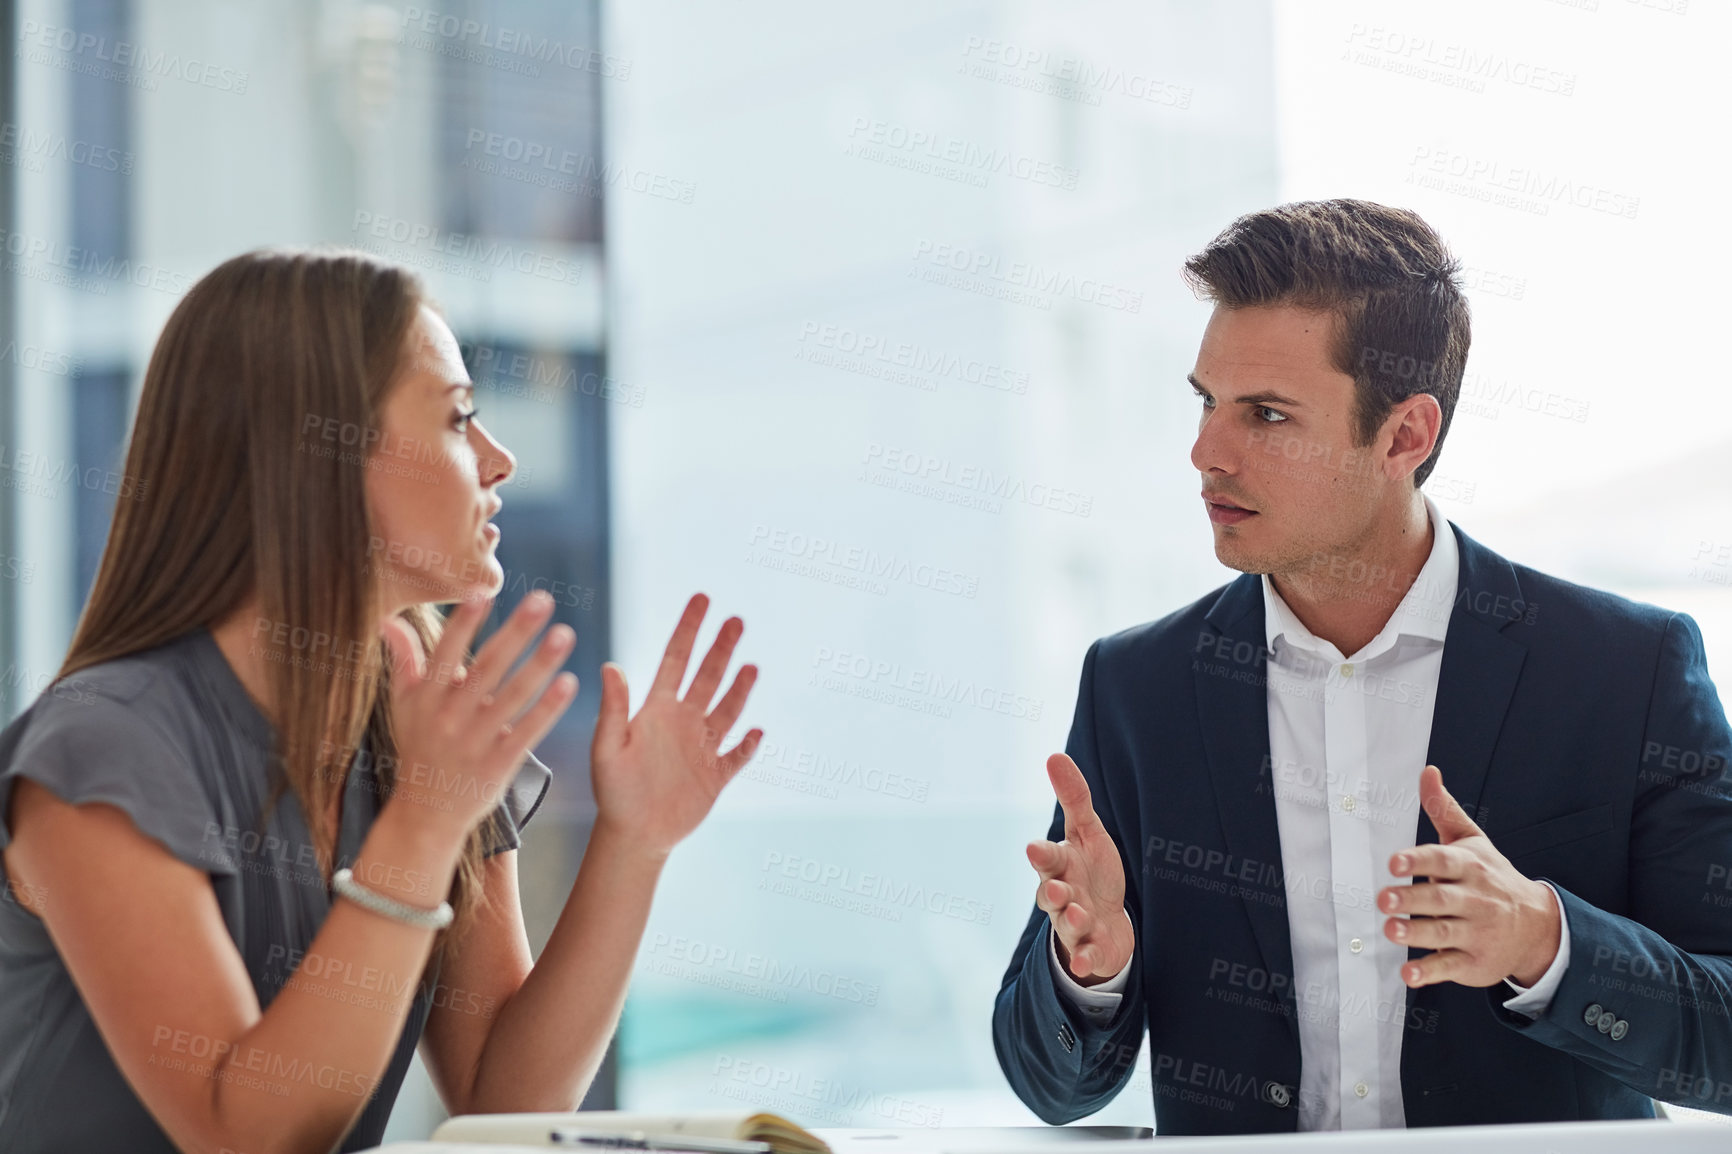 Buy stock photo Cropped shot of two businesspeople having a discussion in the office